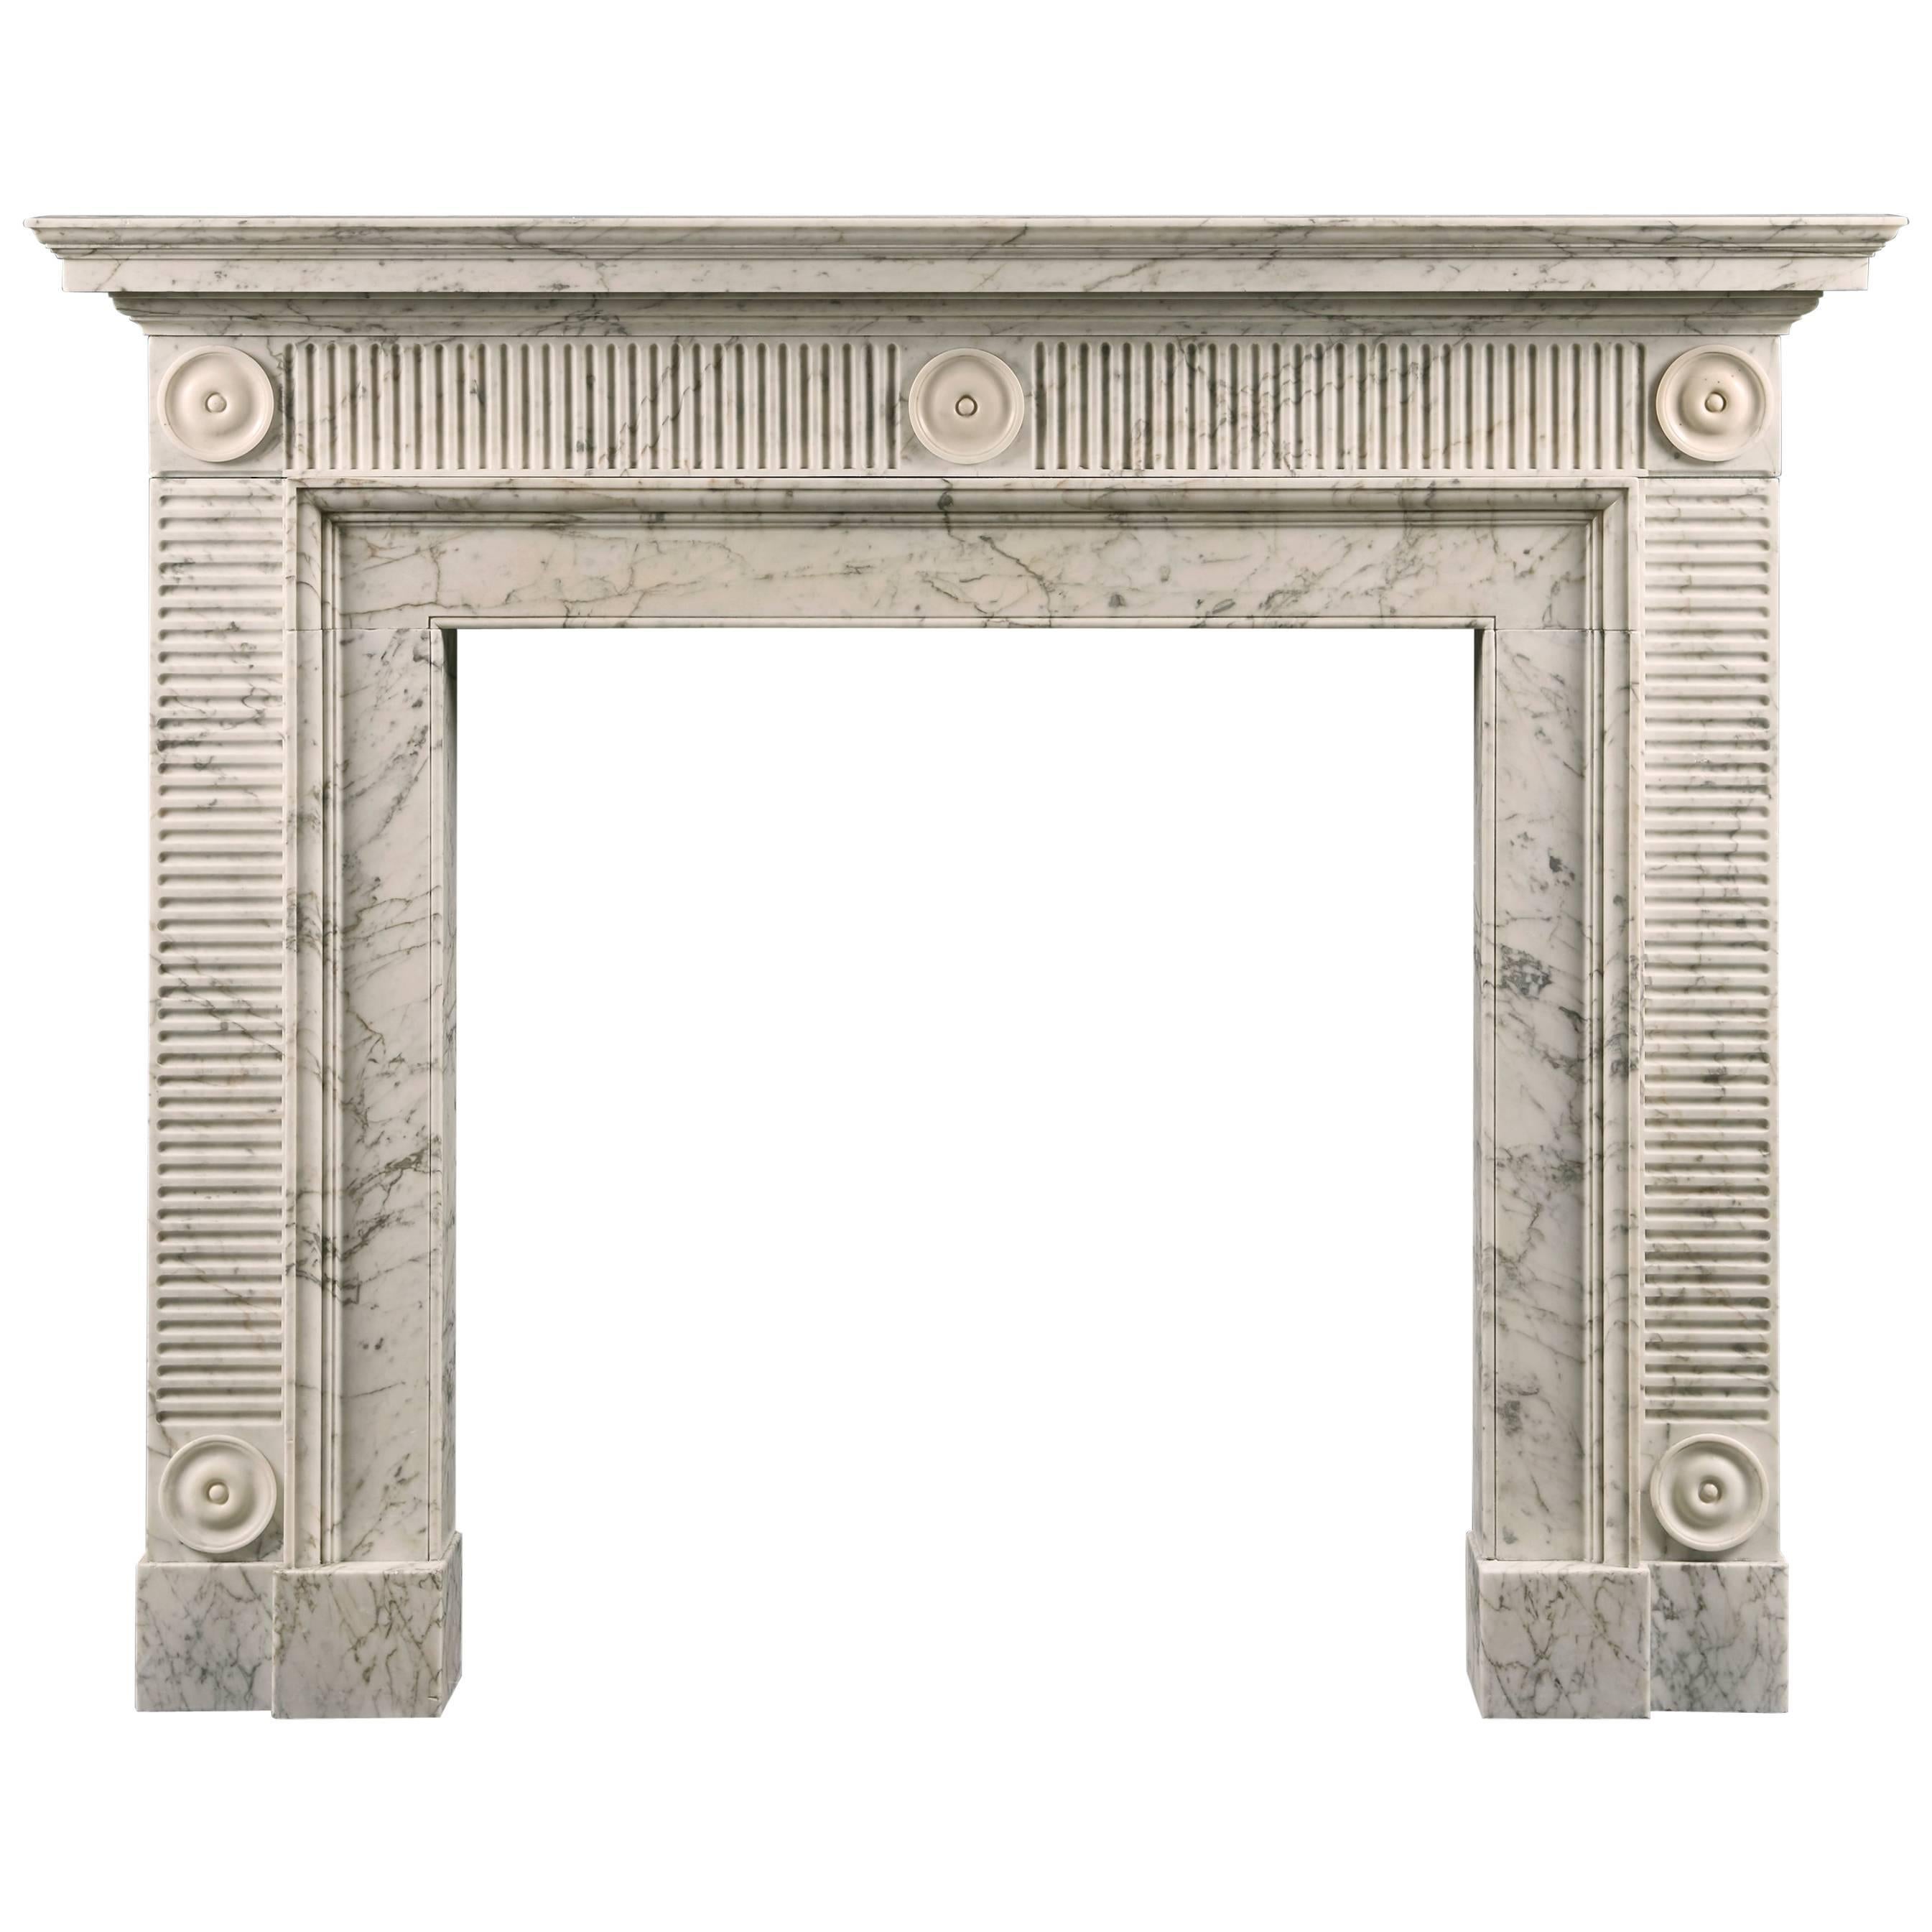 Late 18th Century Soane Style Fireplace in Carrara Marble